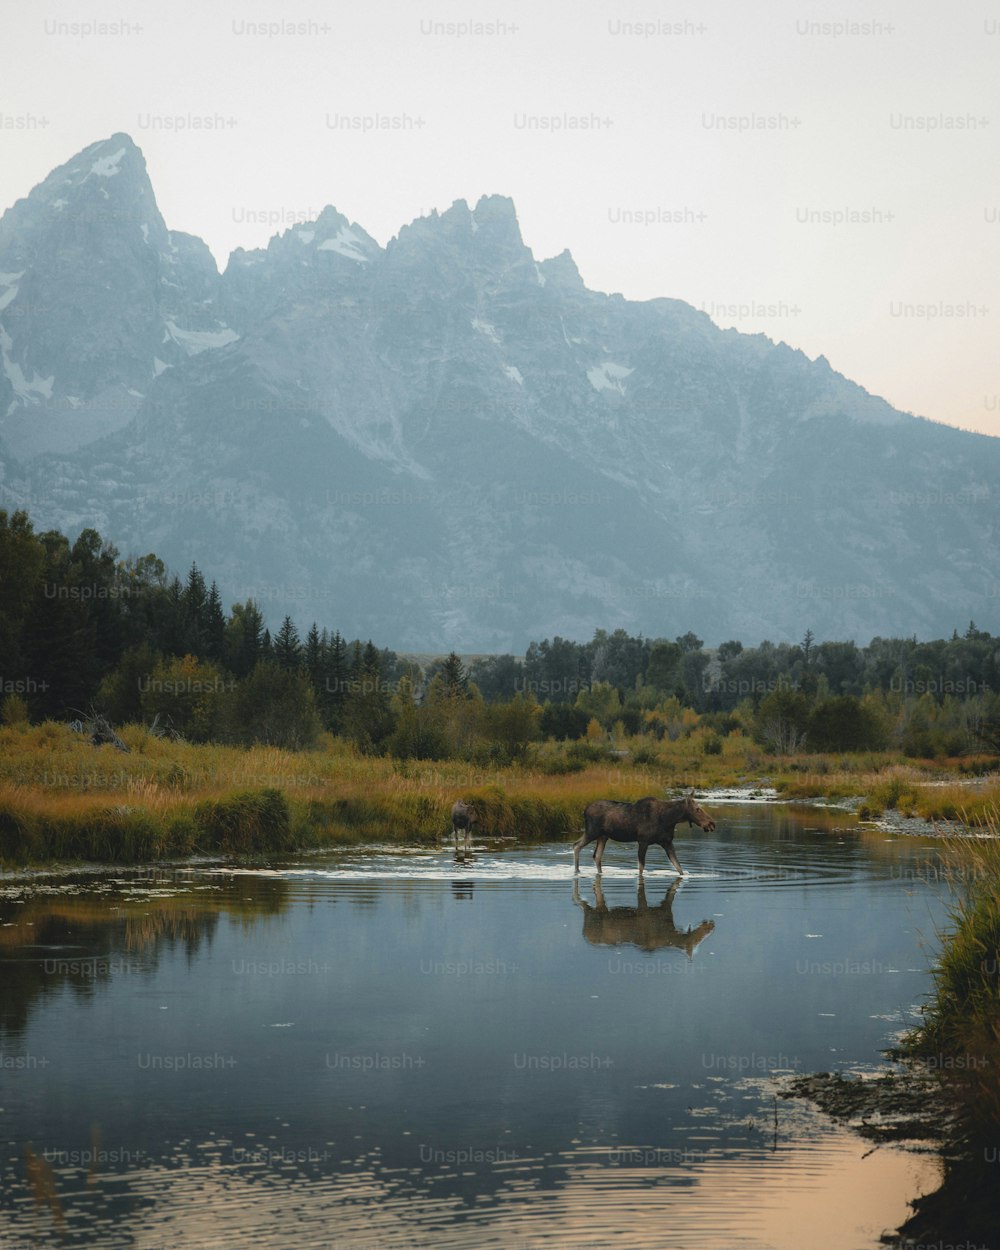 a moose is standing in the water in front of a mountain